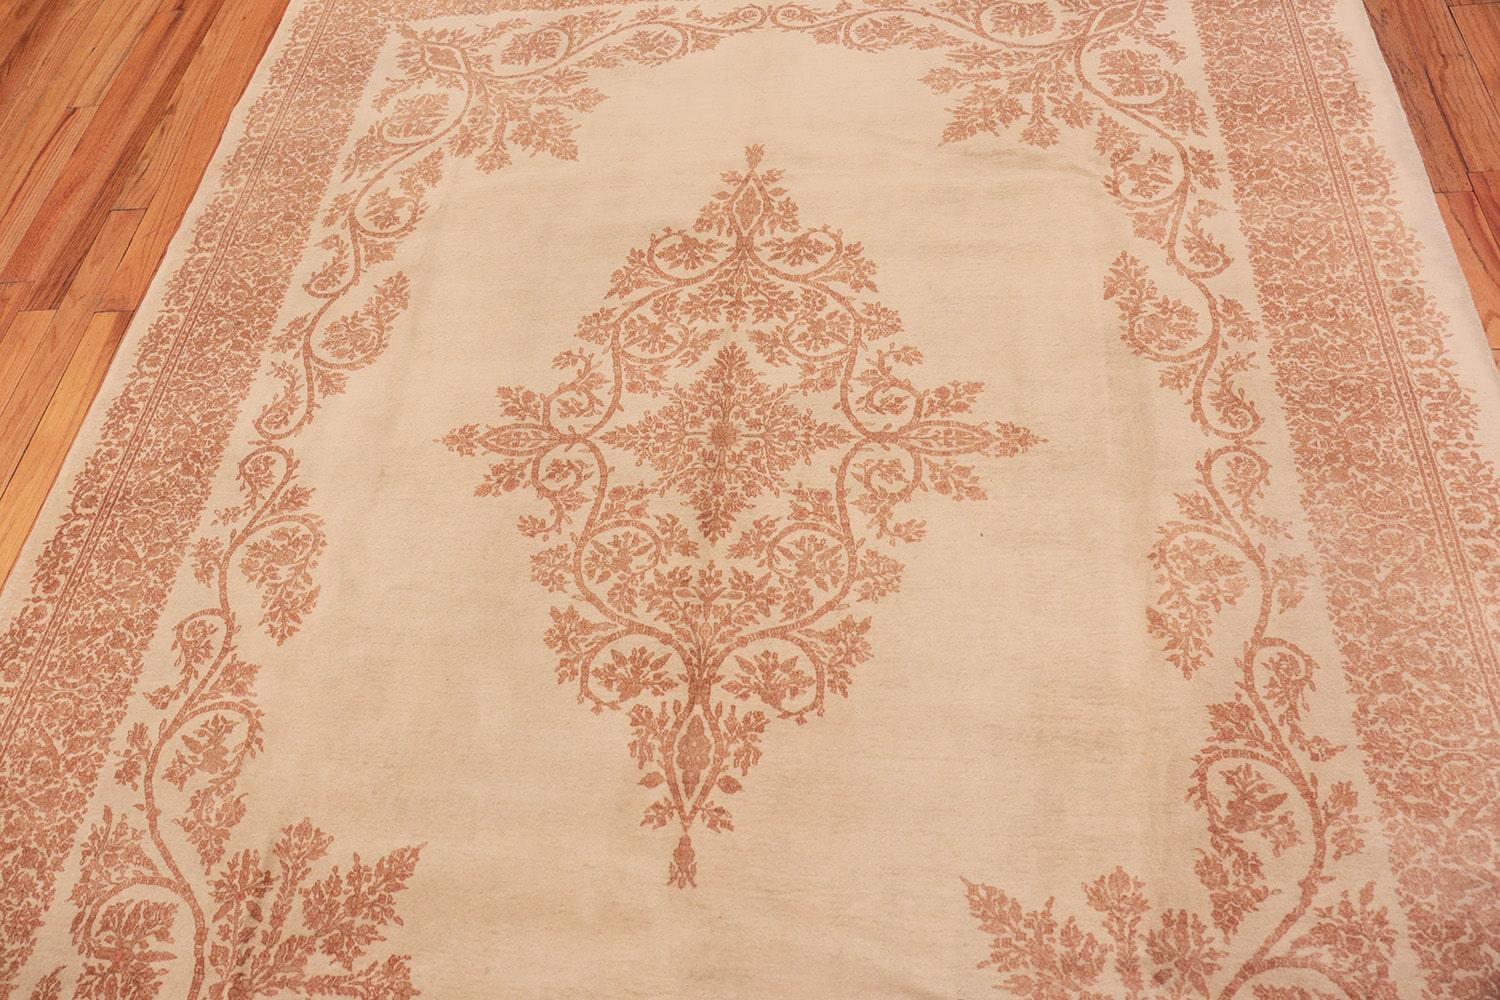 Hand-Knotted Antique Persian Kerman Rug. Size: 7 ft 3 in x 9 ft (2.21 m x 2.74 m)